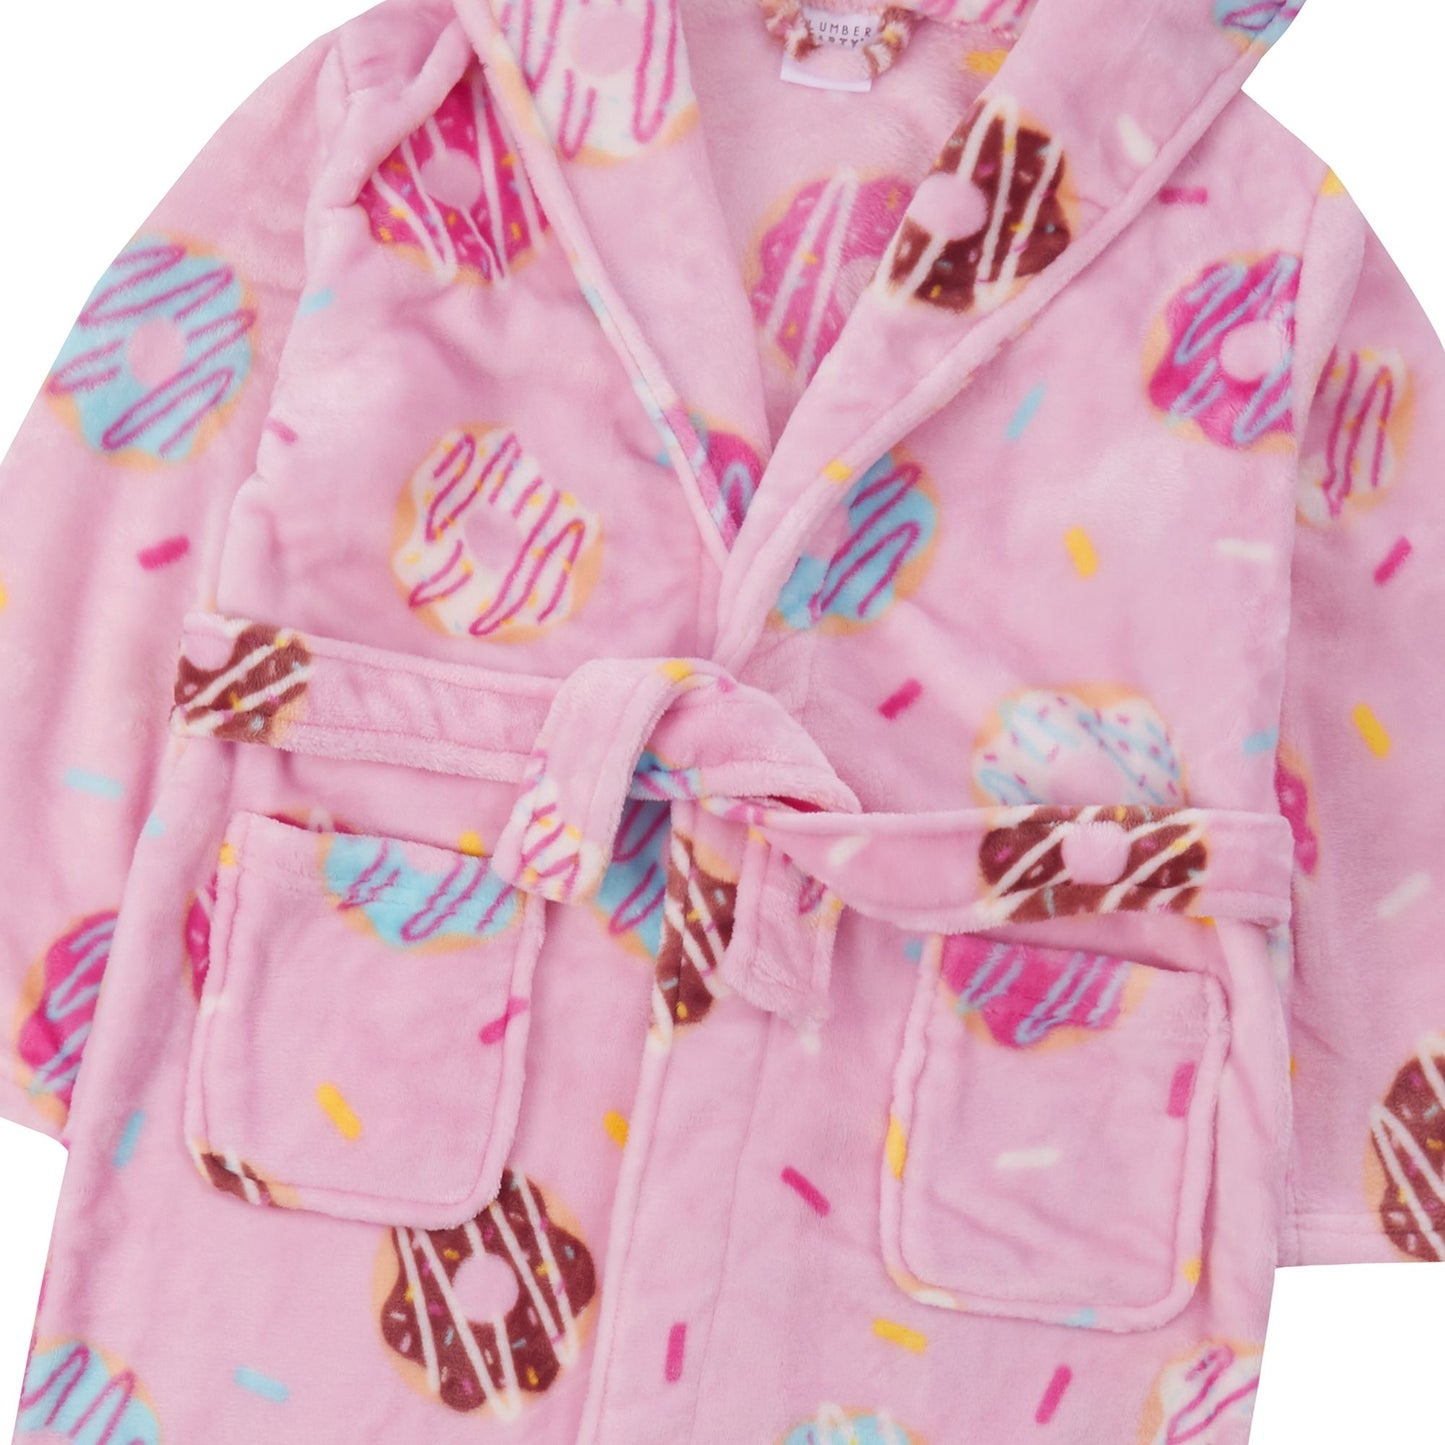 Childrens Pink Donut Print Fleece Dressing Gown ~ 7-13 years